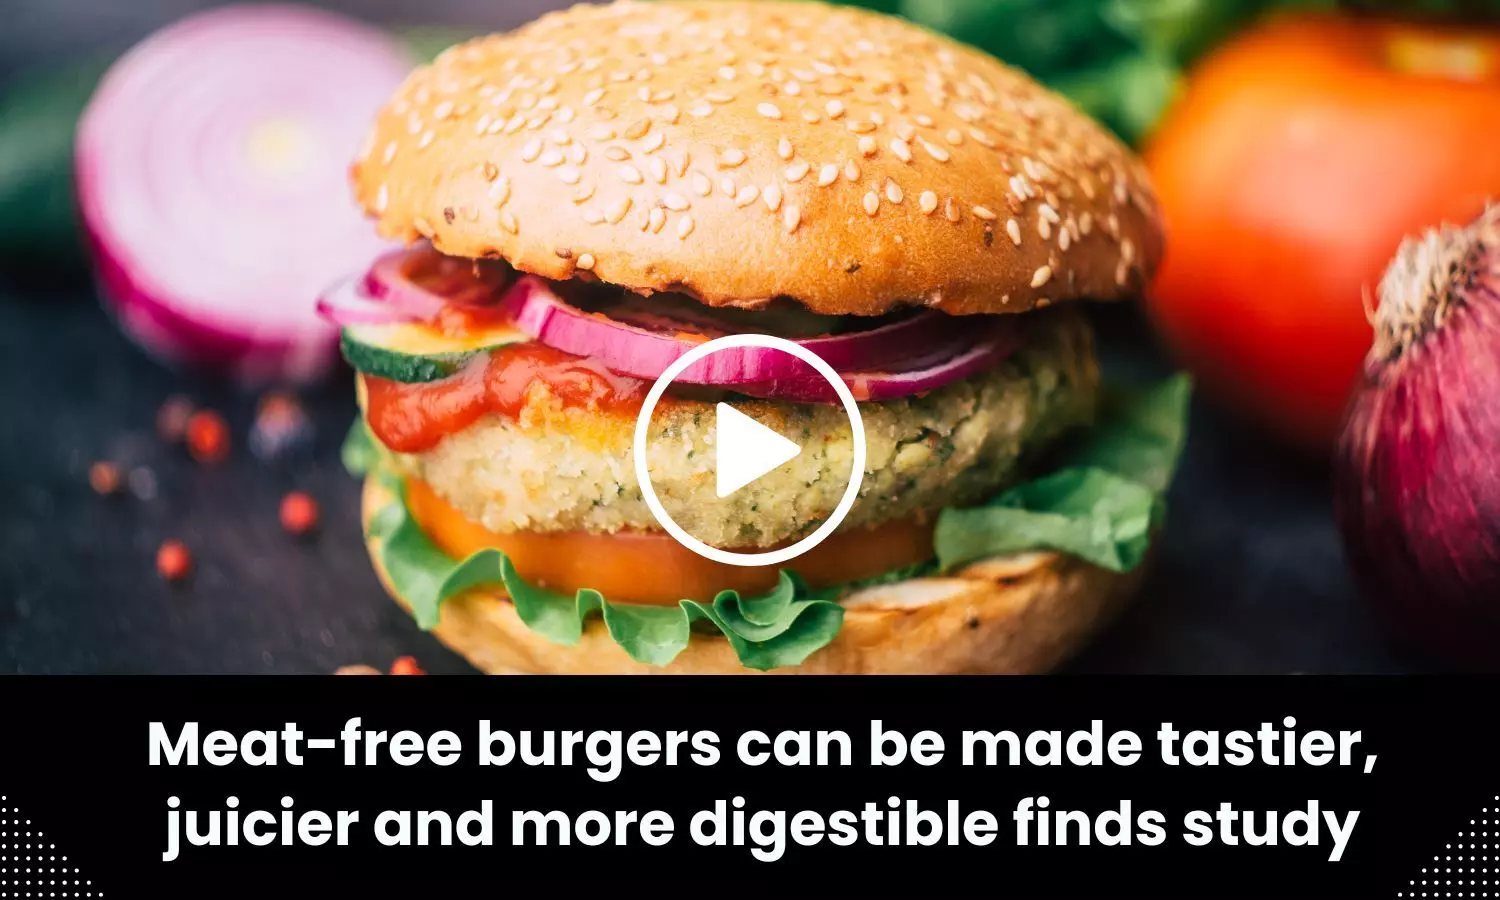 Meat-free burgers now made tastier, juicier, and easily digestible finds study